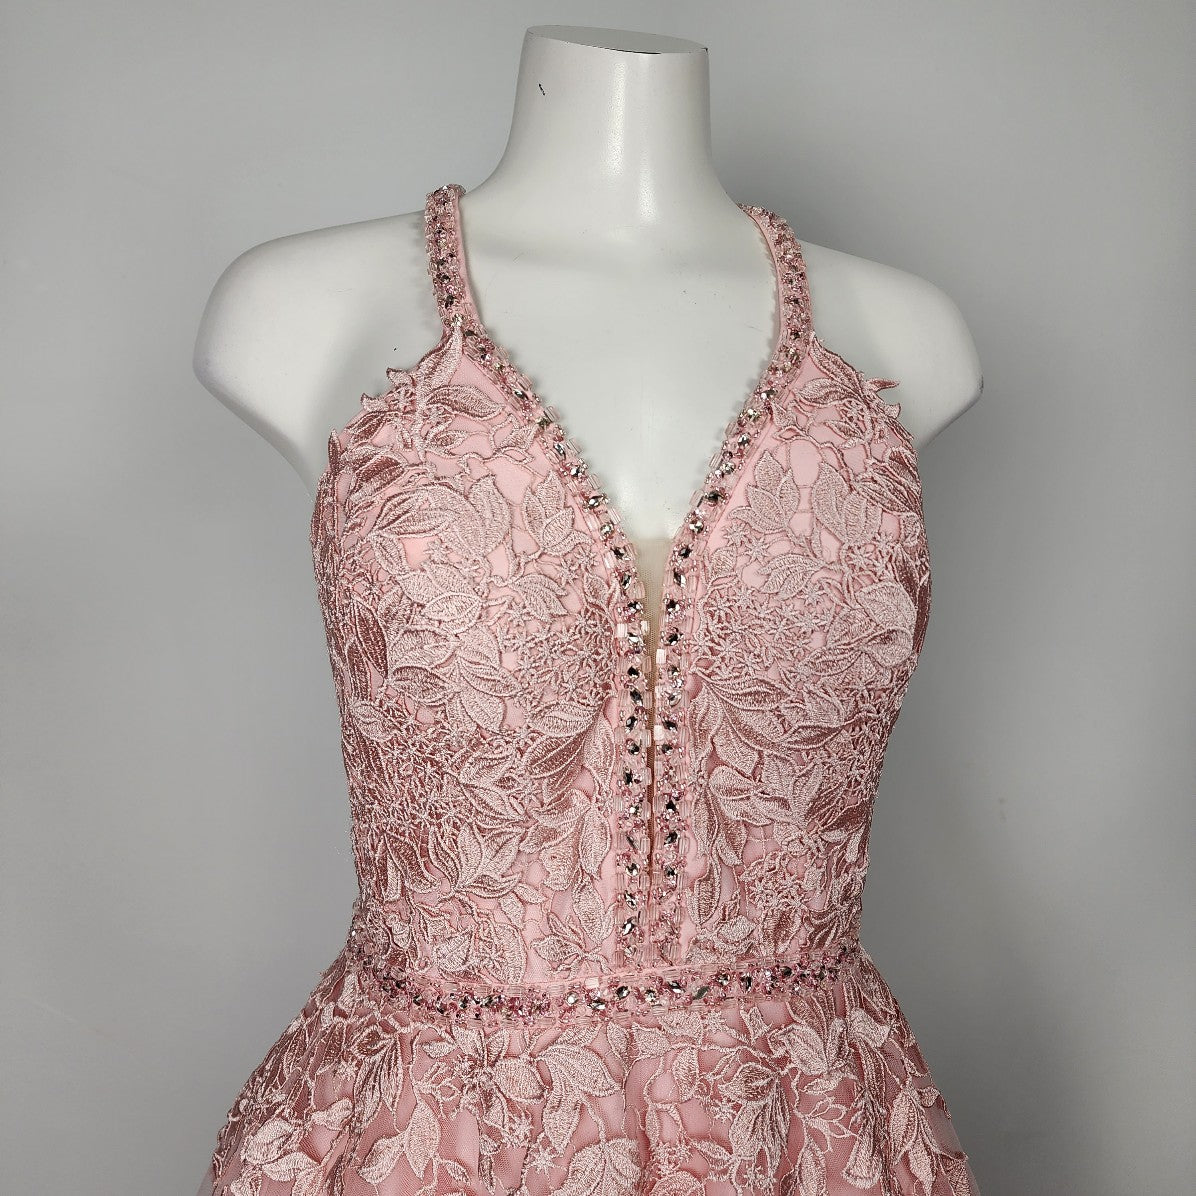 JVN by Jovani Pink Flower Lace Rhinestones Tulle Gown Size M Grad Prom Event